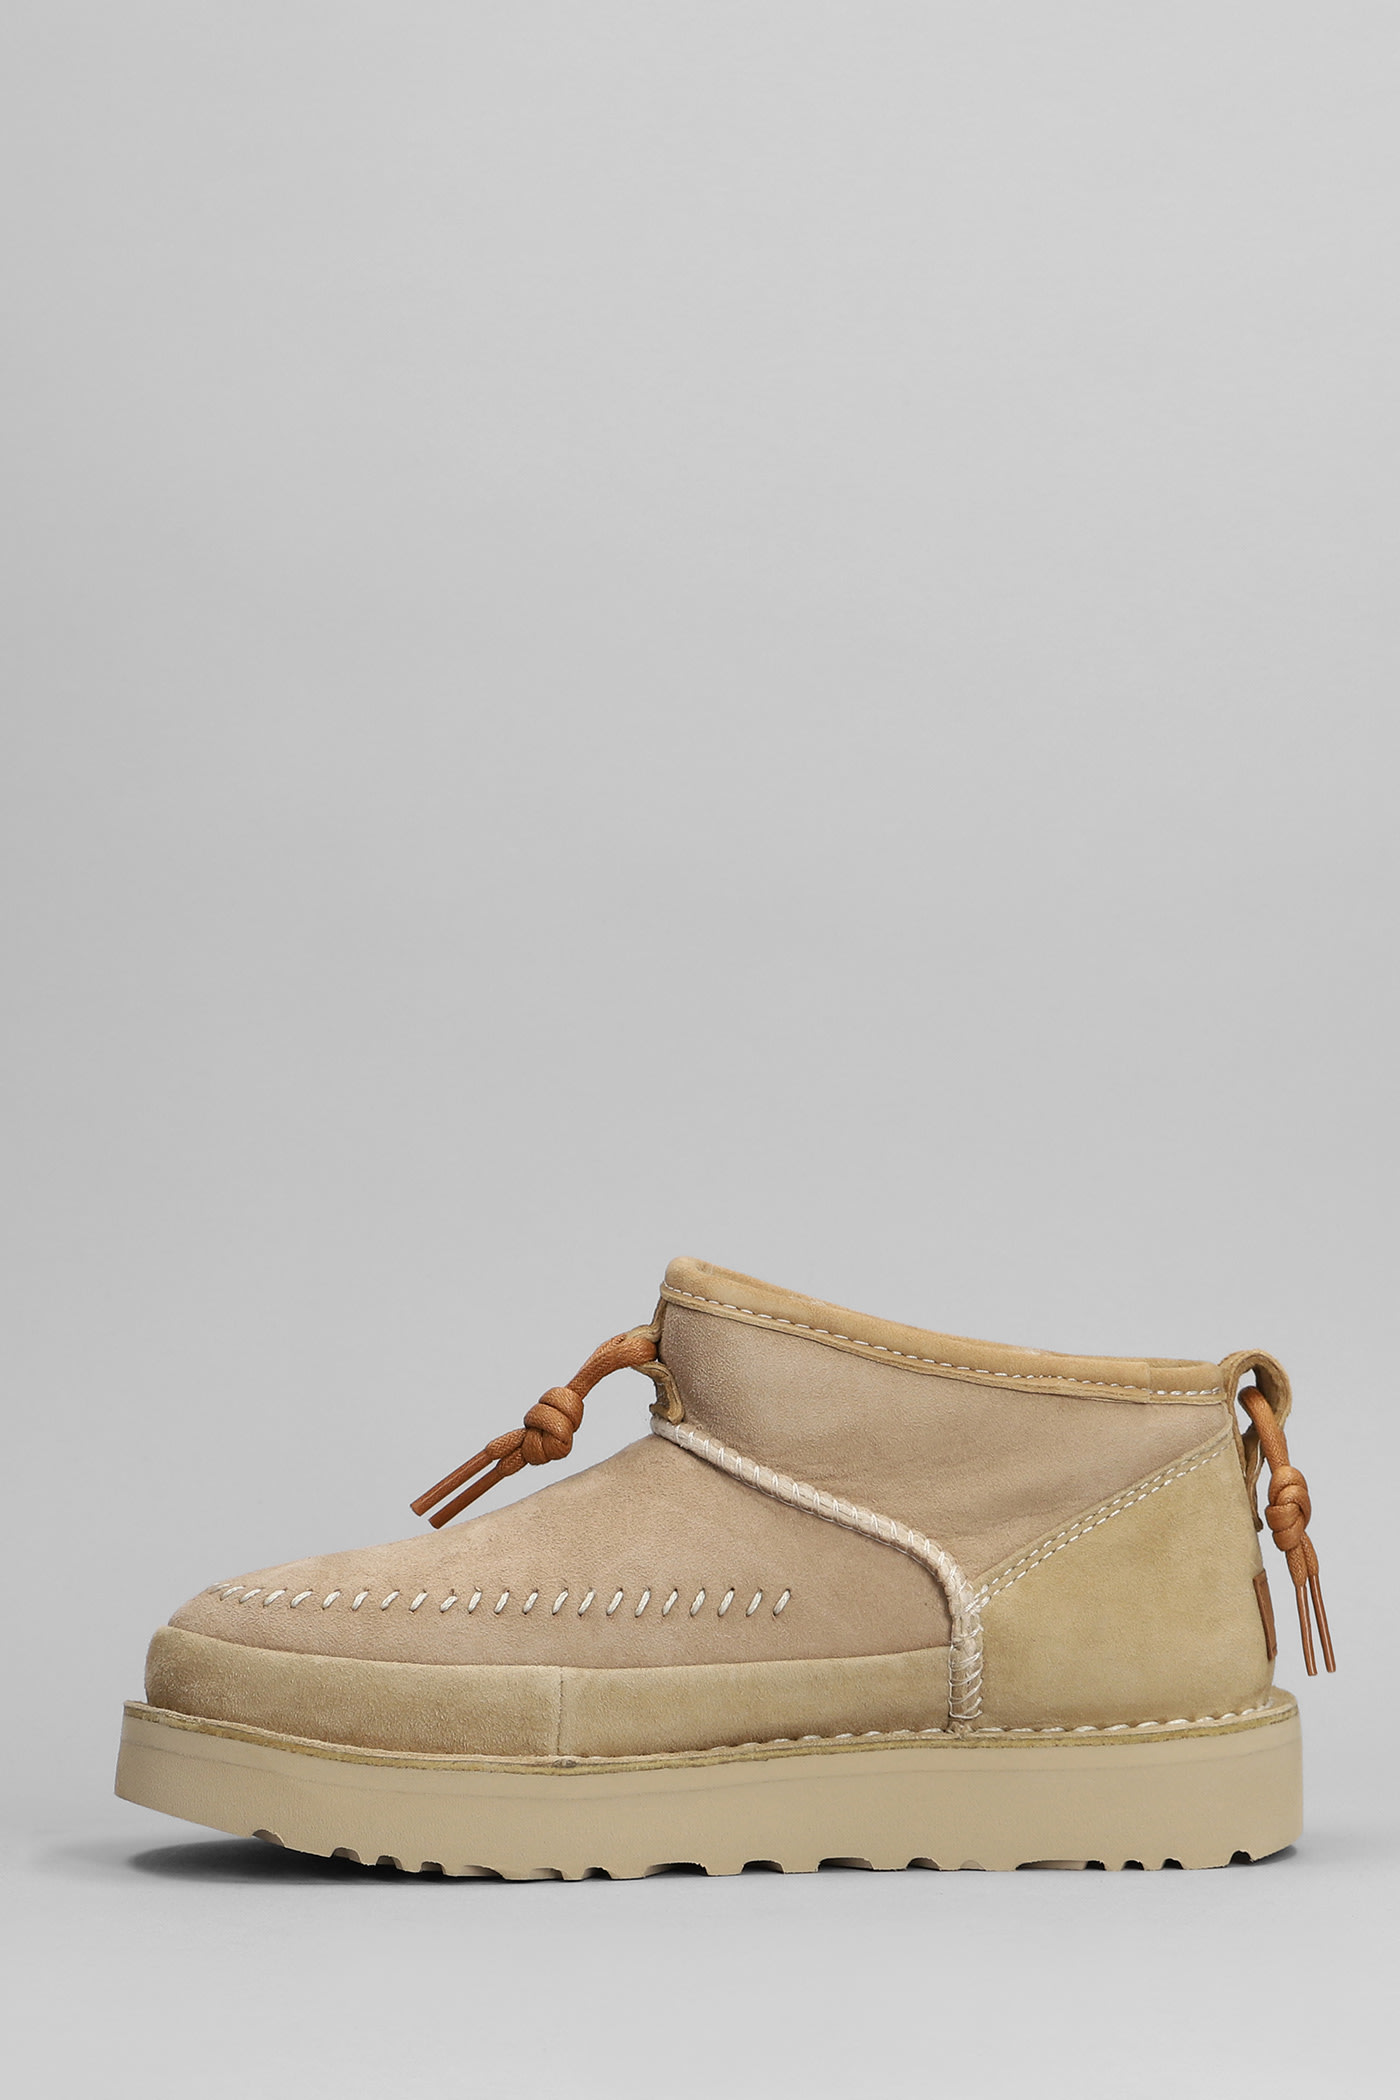 Shop Ugg Ultra Mini Crafted Low Heels Ankle Boots In Beige Suede